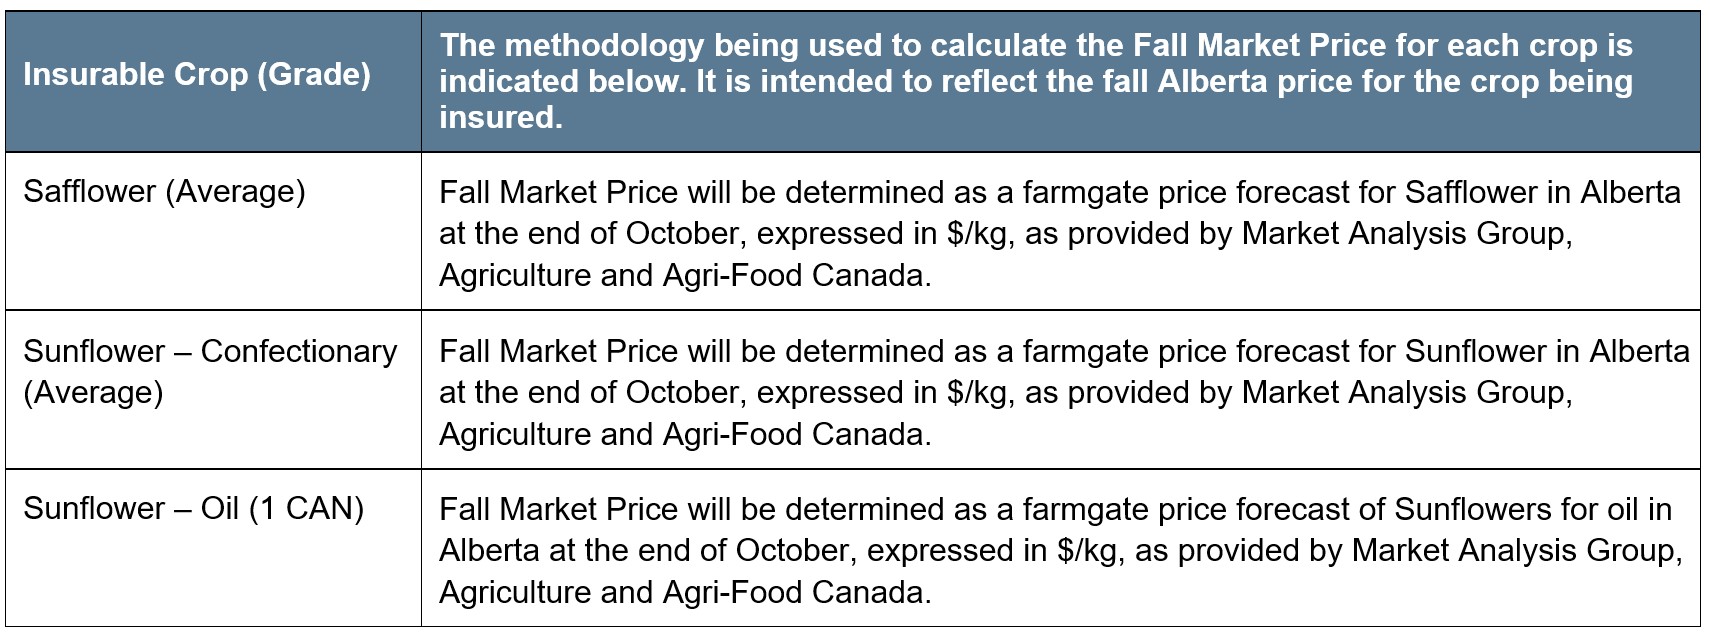 Sunflower Article 2 Pricing market price methodology. Call AFSC for details